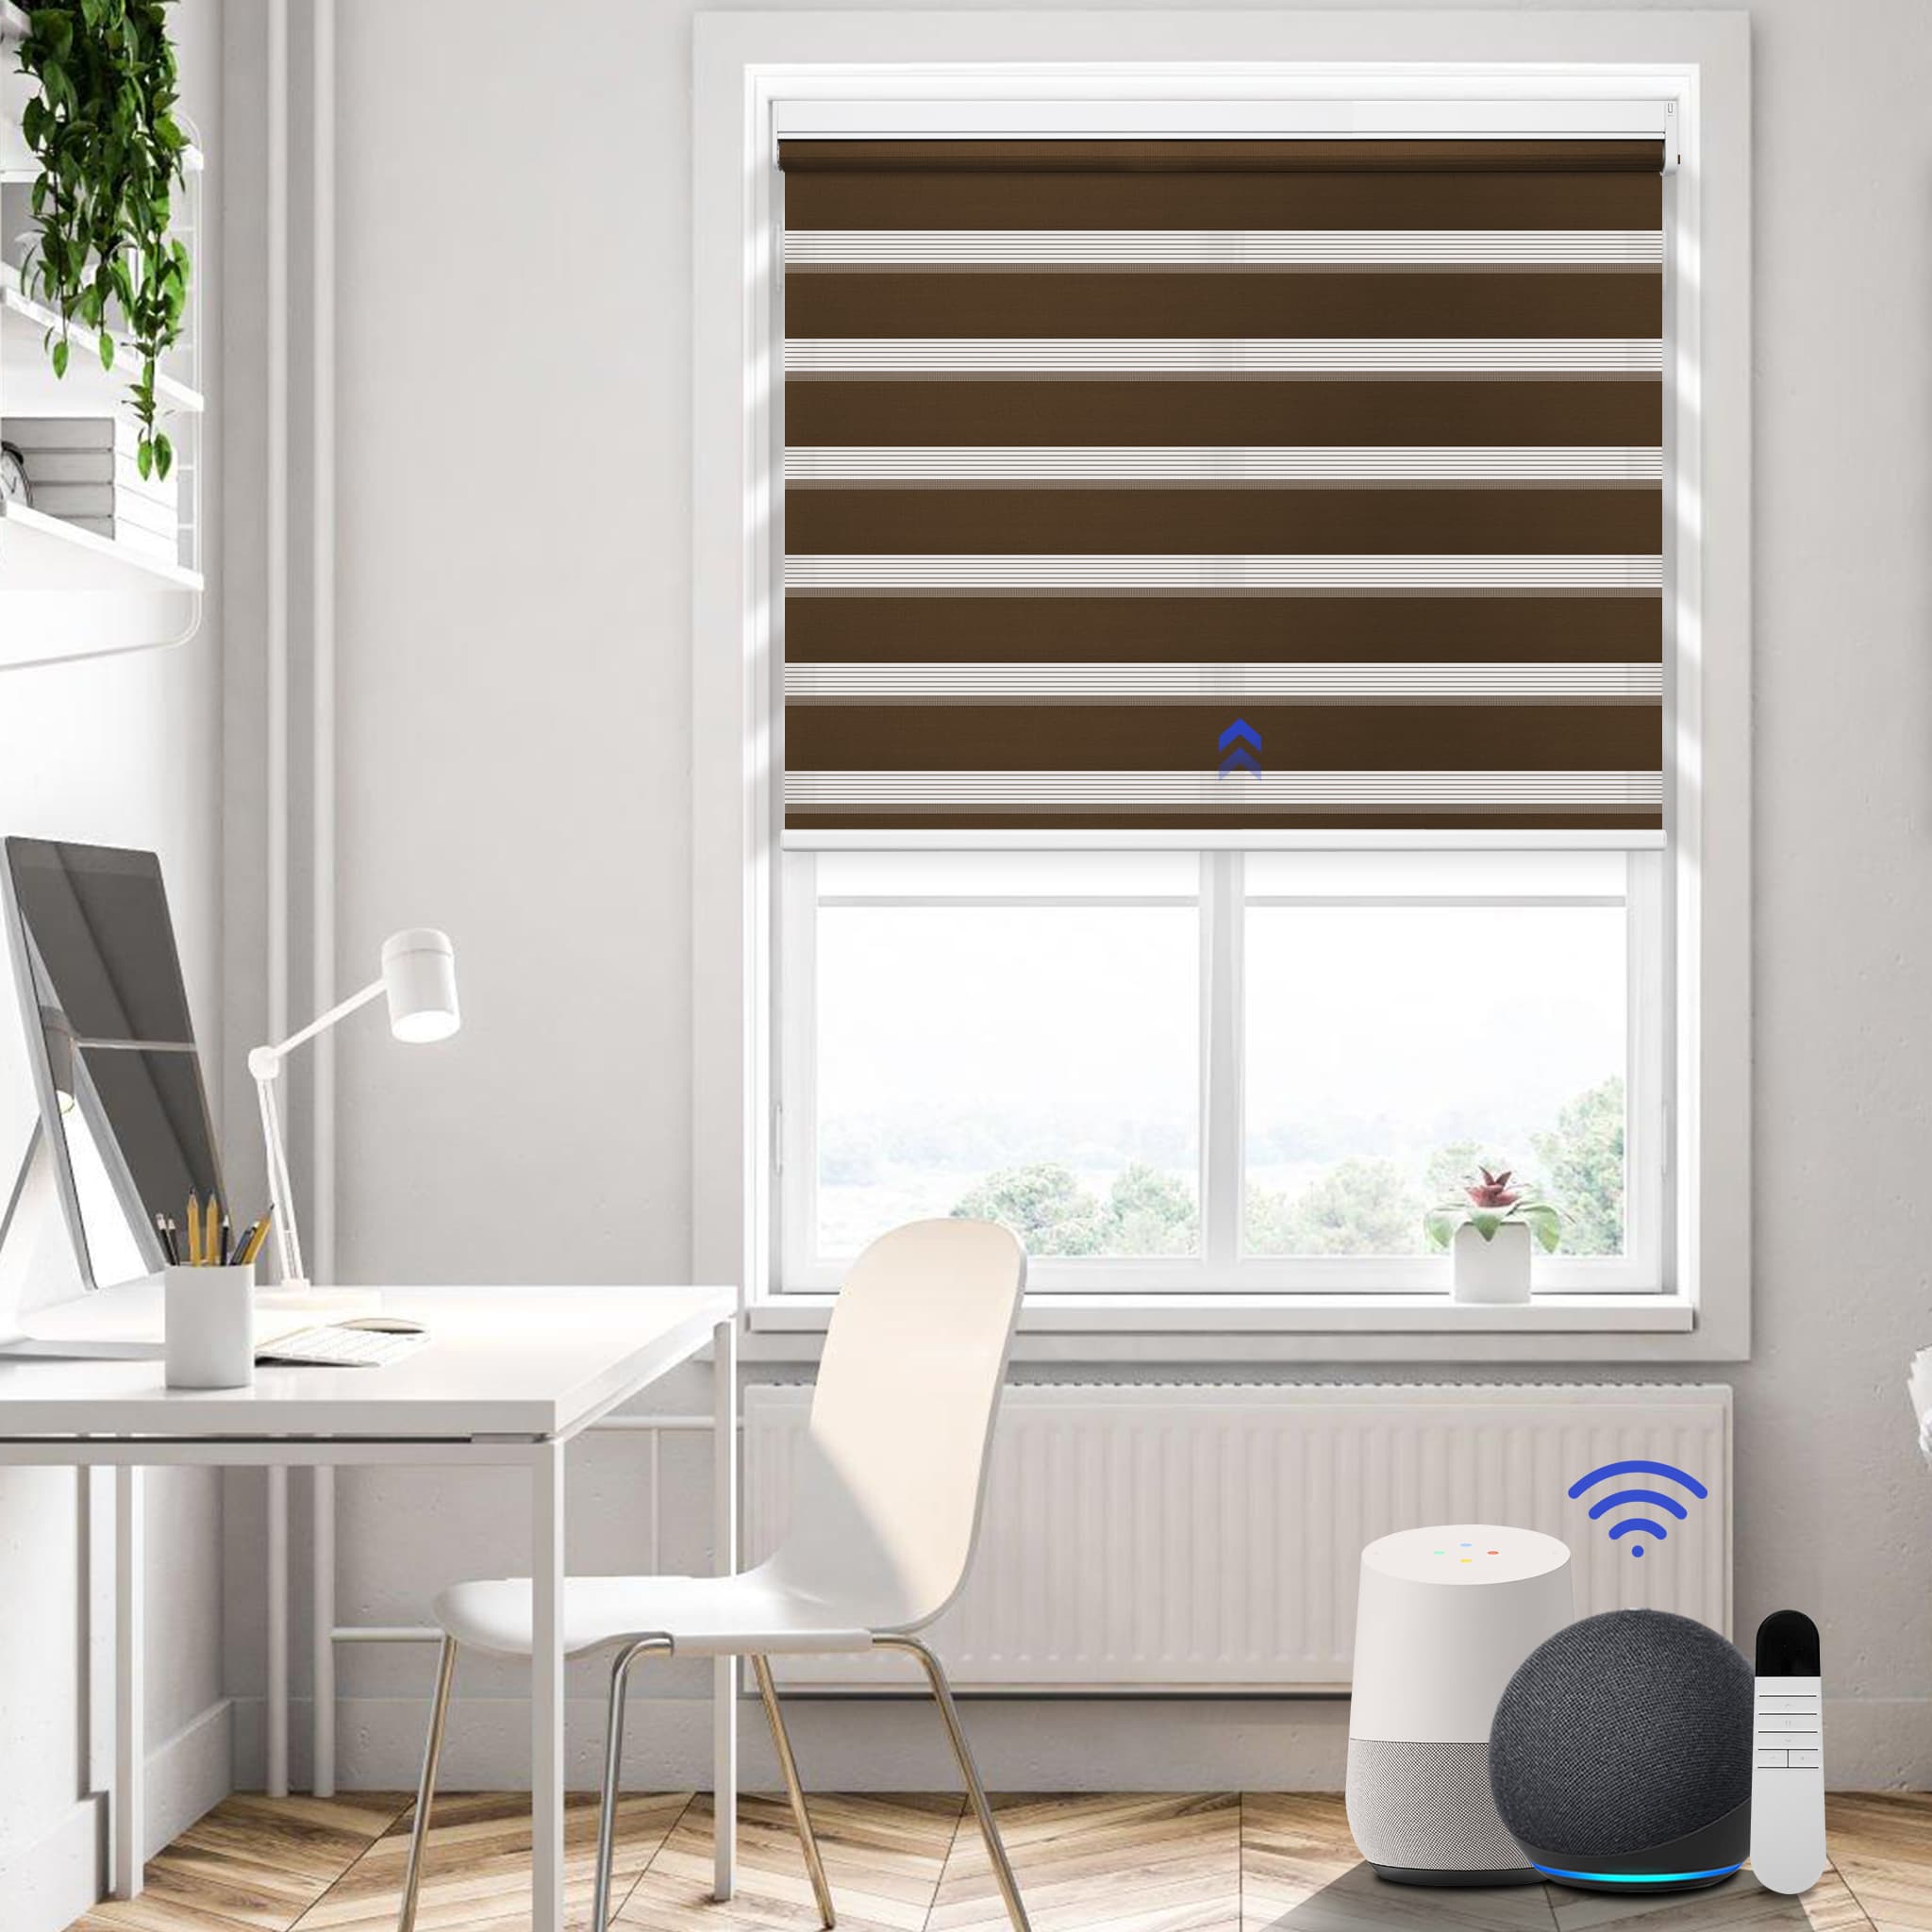 zebra motorized blinds remote control and voice control, works with smart speakers